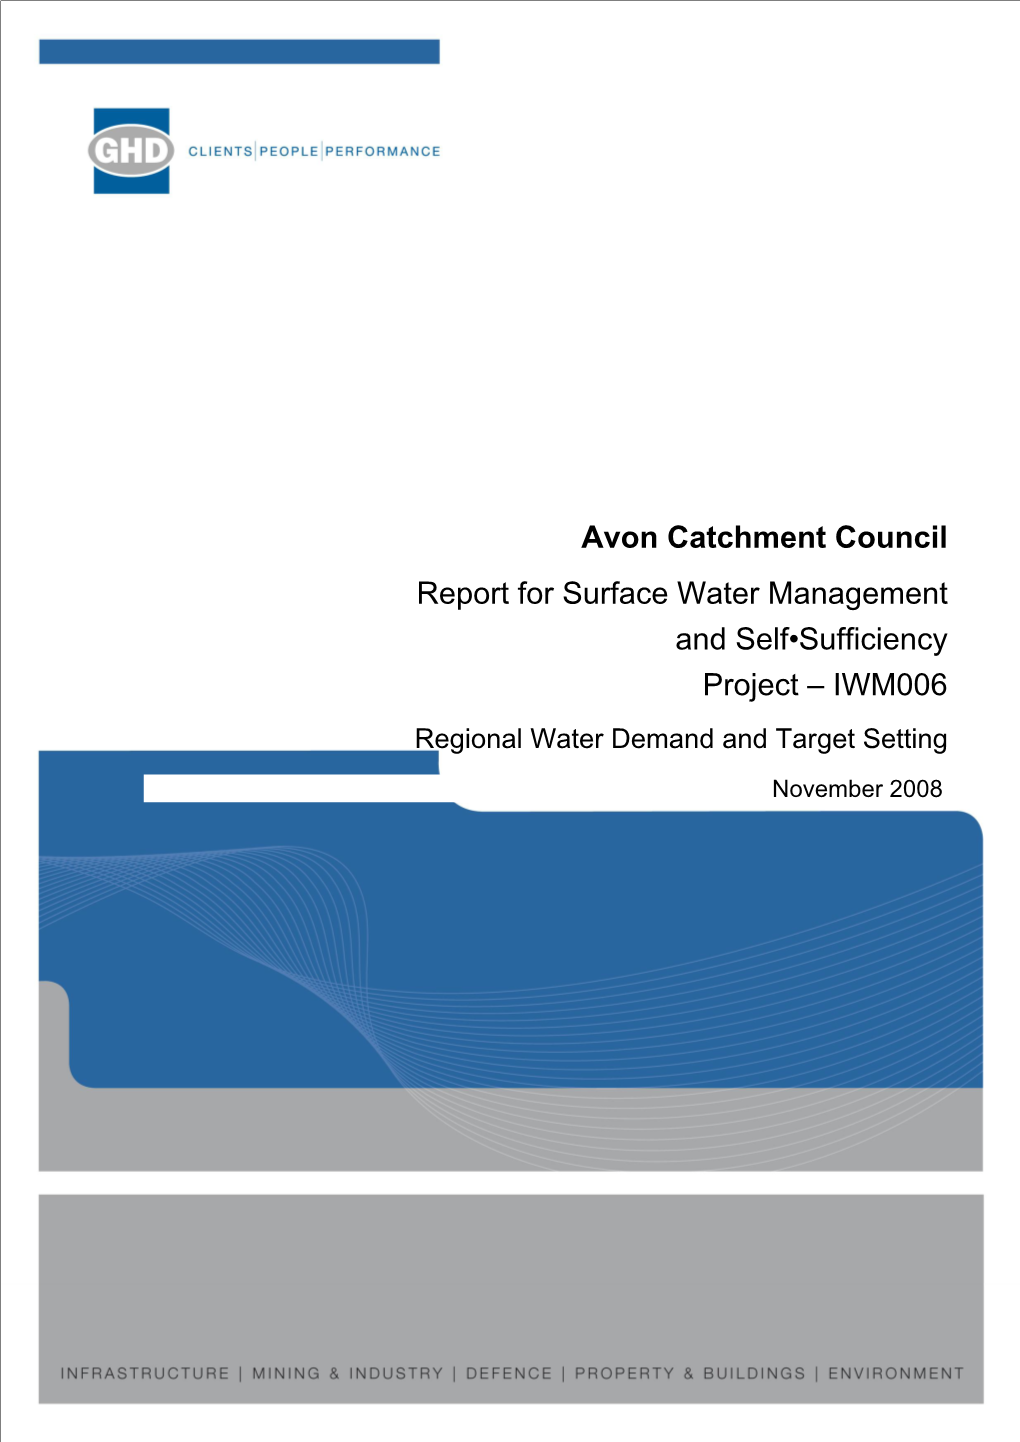 Avon Catchment Council Report for Surface Water Management and Self-Sufficiency Project